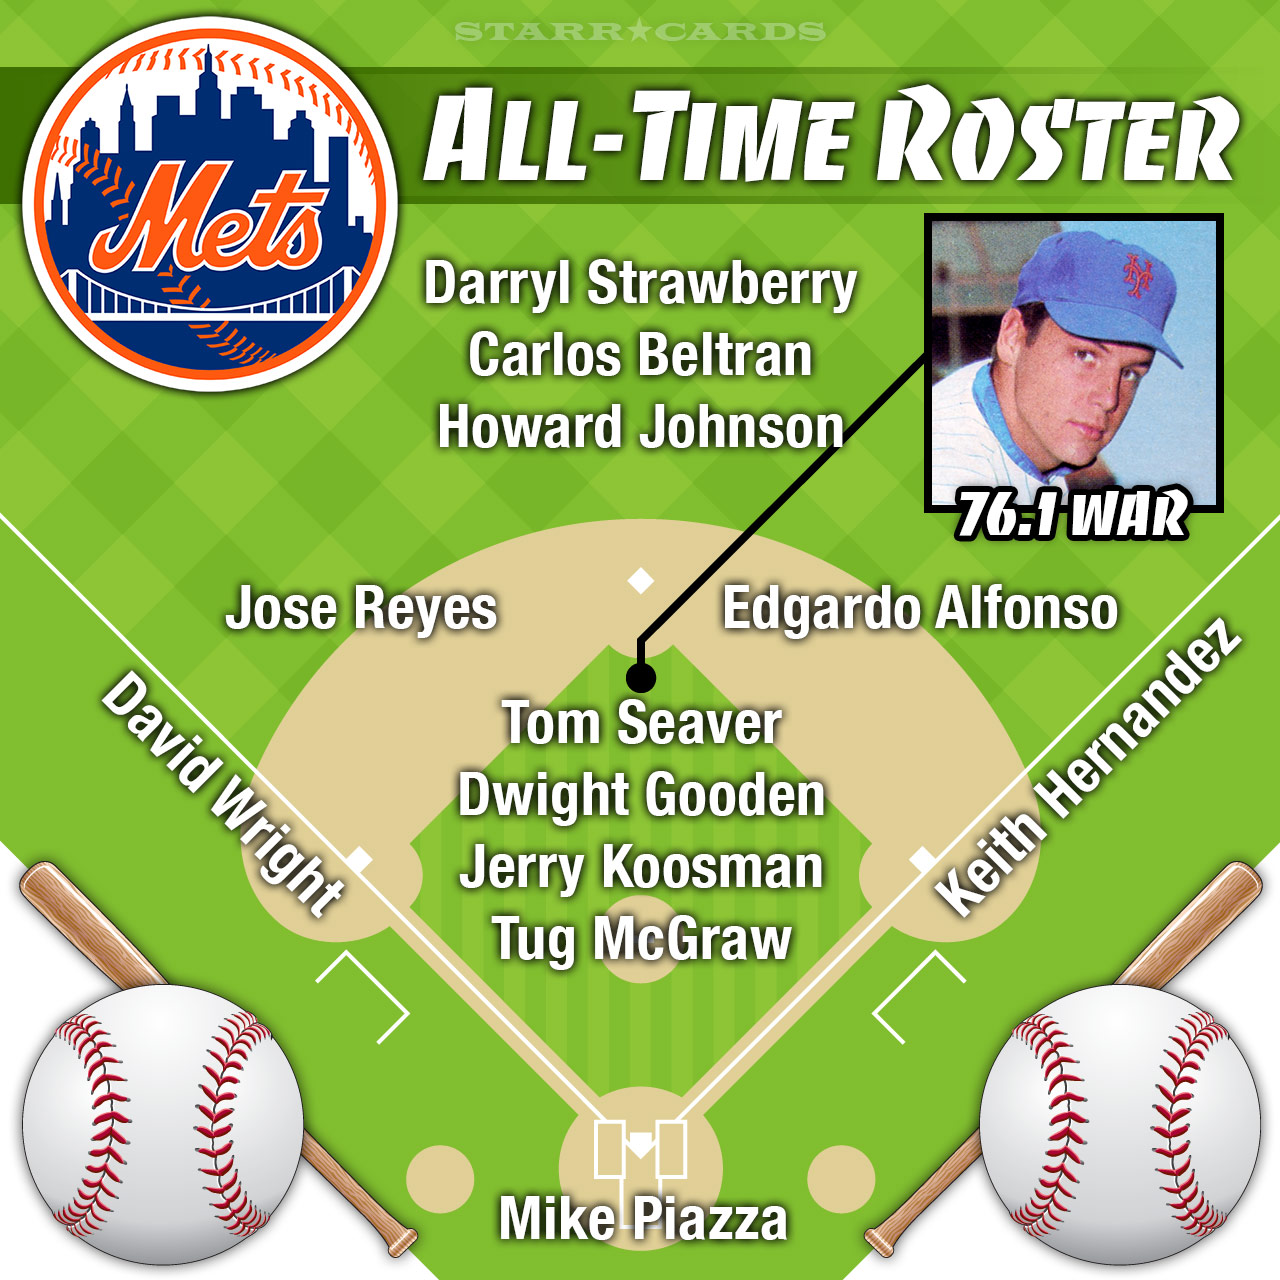 NY Mets 1969 Roster and Schedule - Mets History